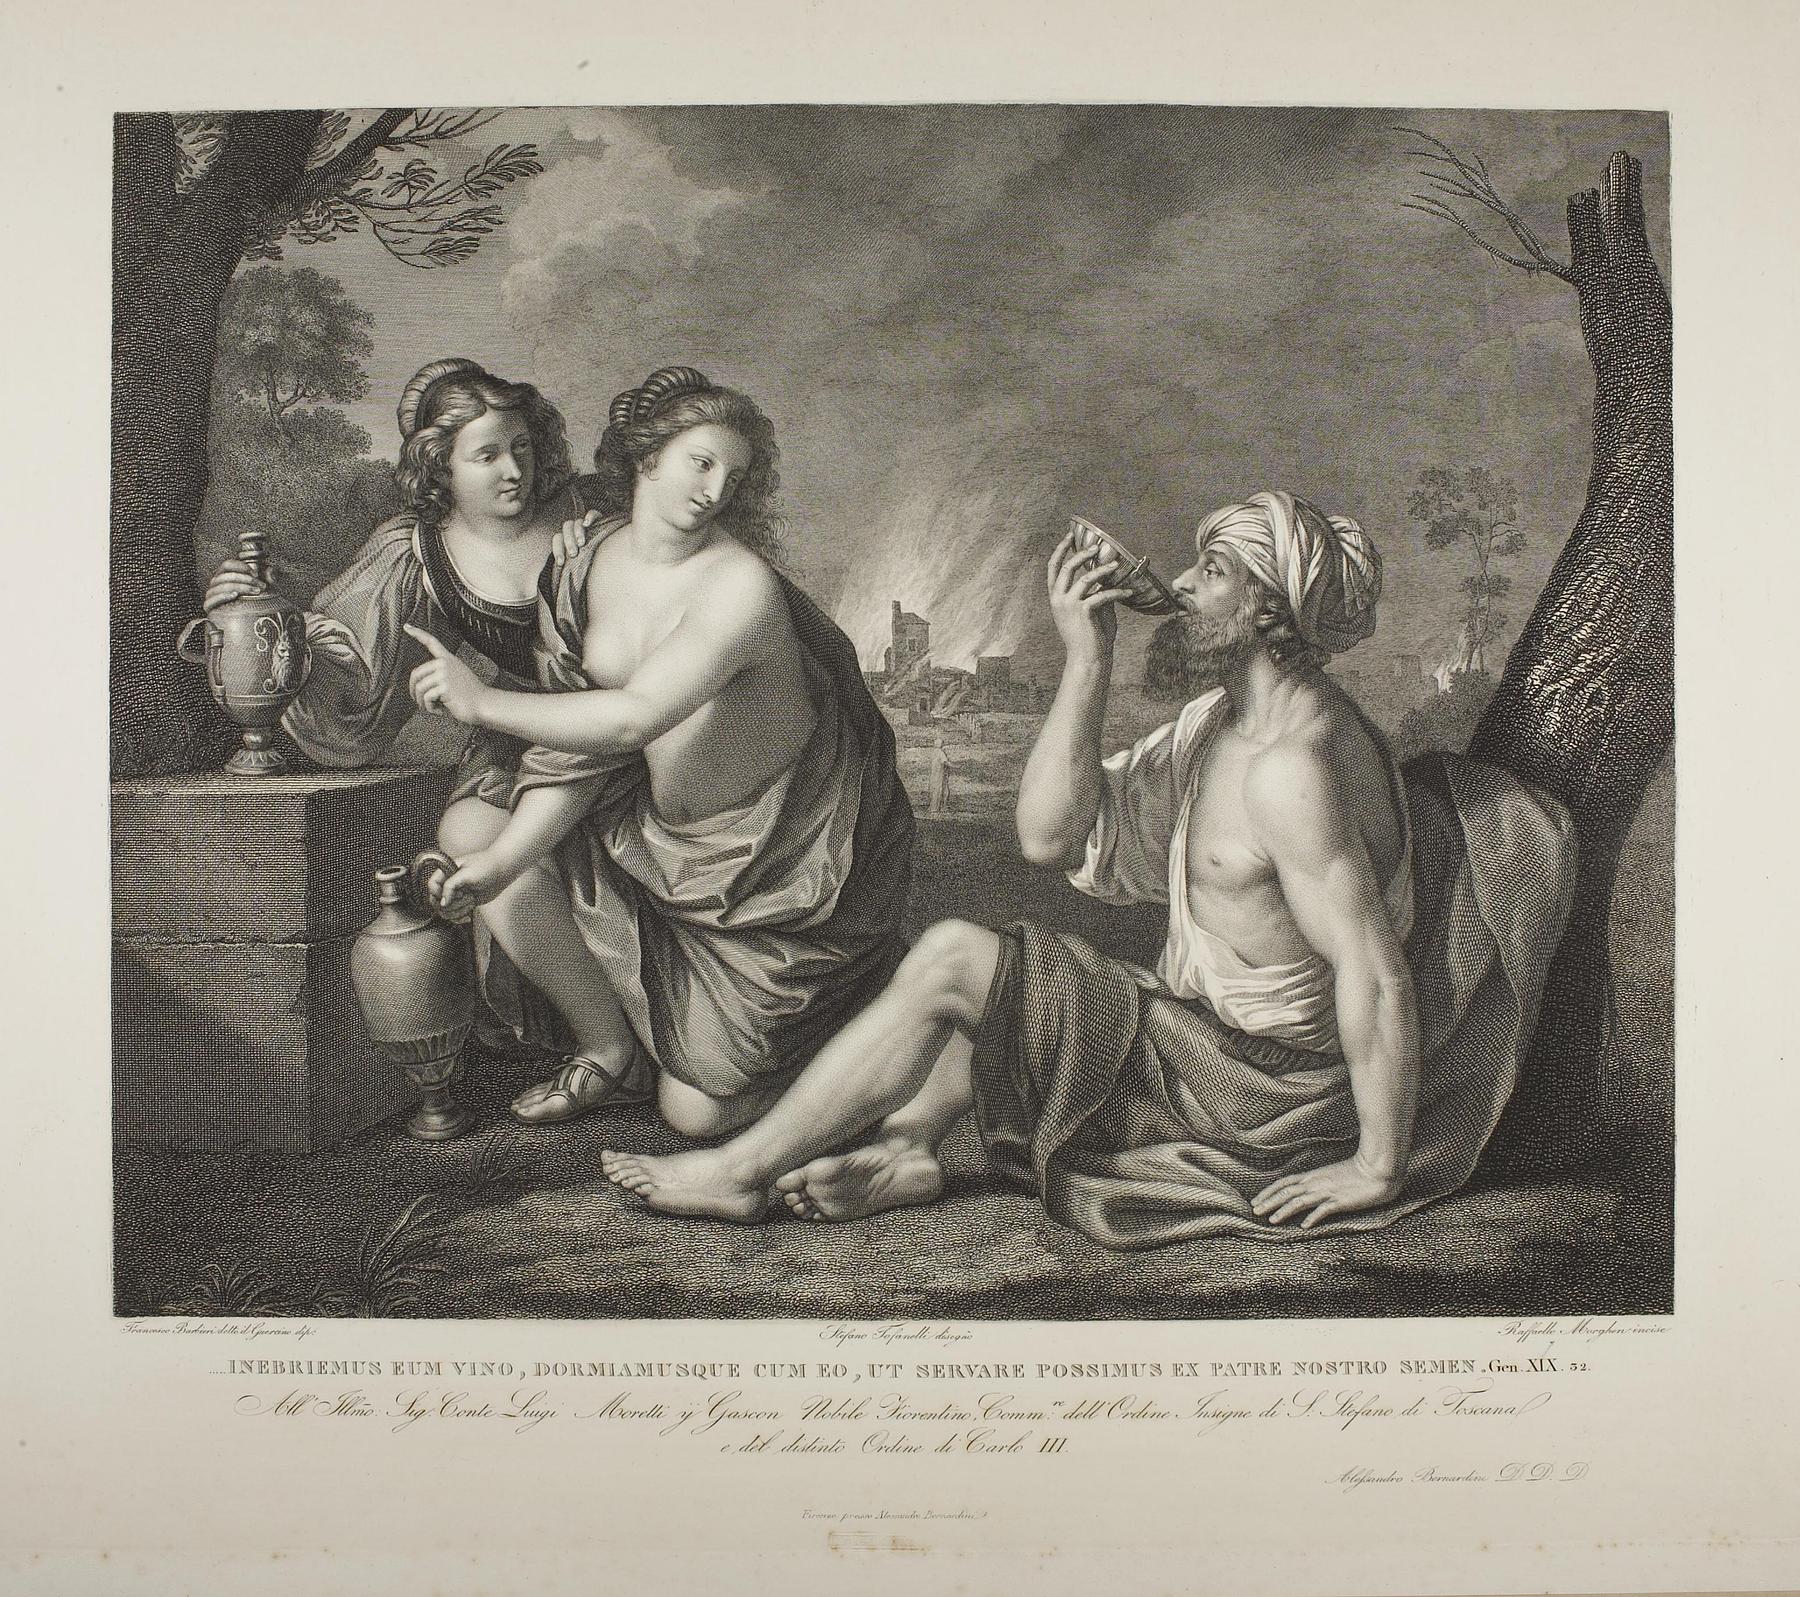 Lot and his Daughters, E855